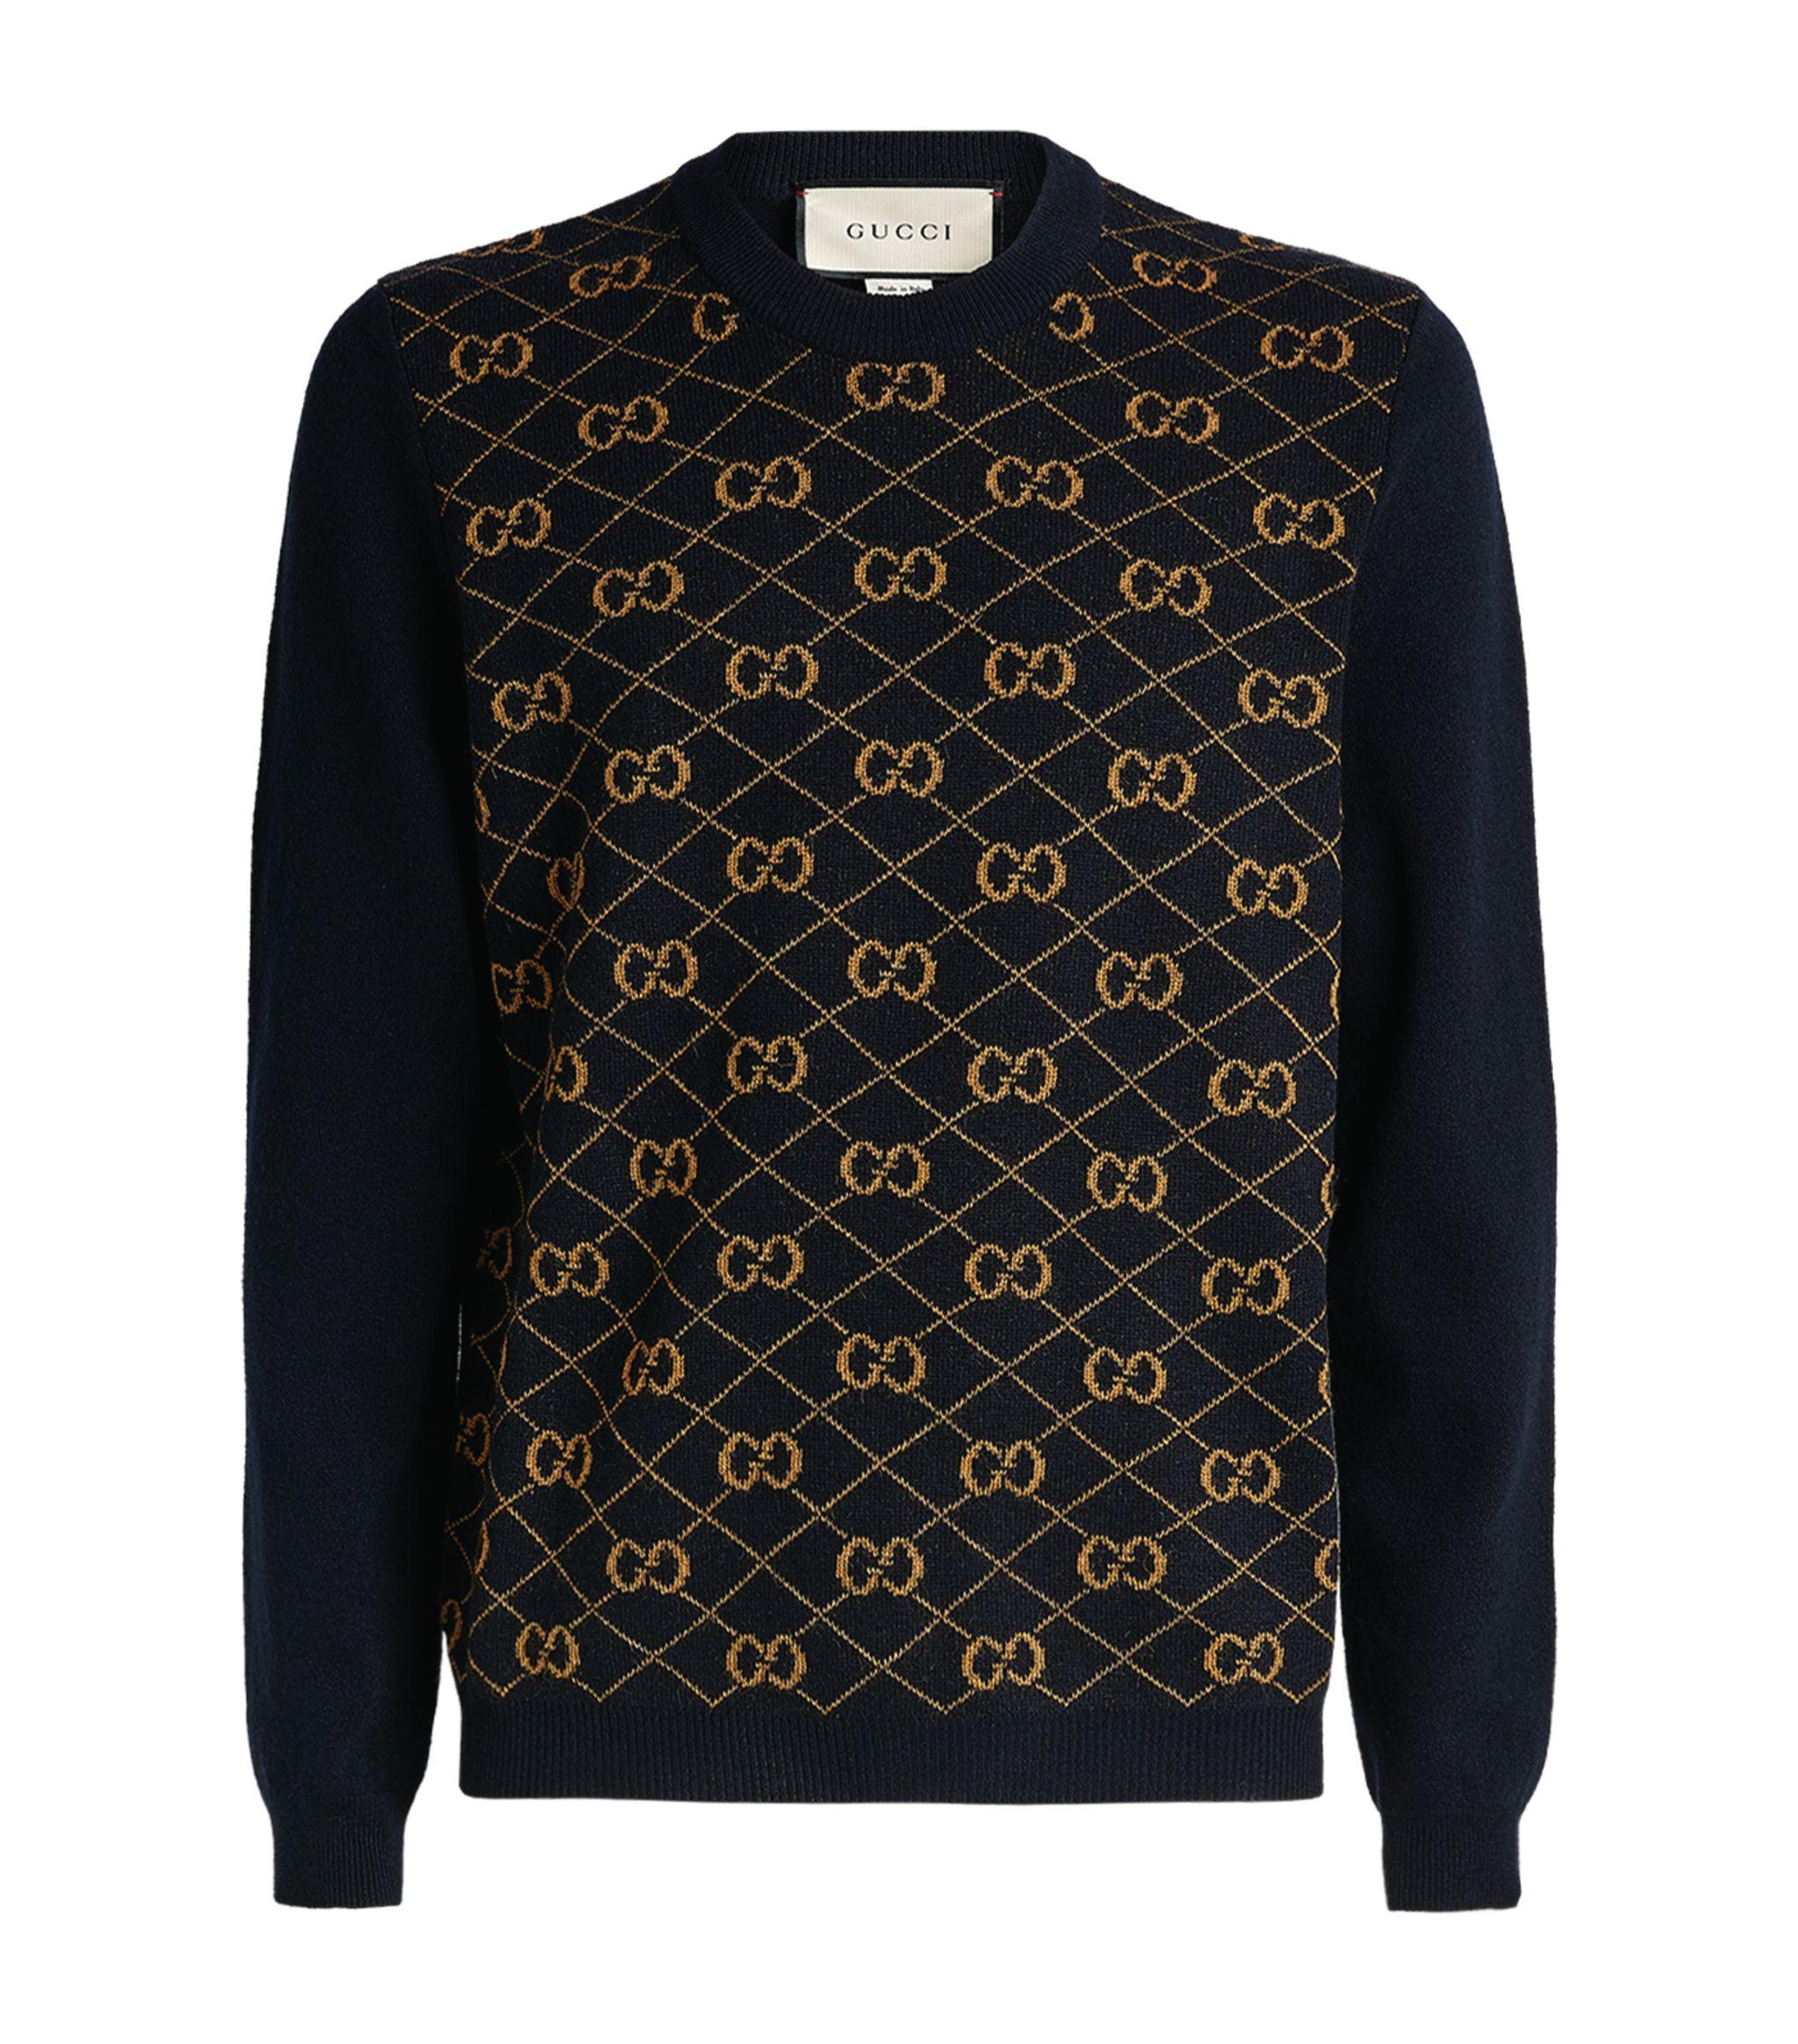 Gucci Wool Knitted GG Supreme Sweater in Blue for Men - Lyst